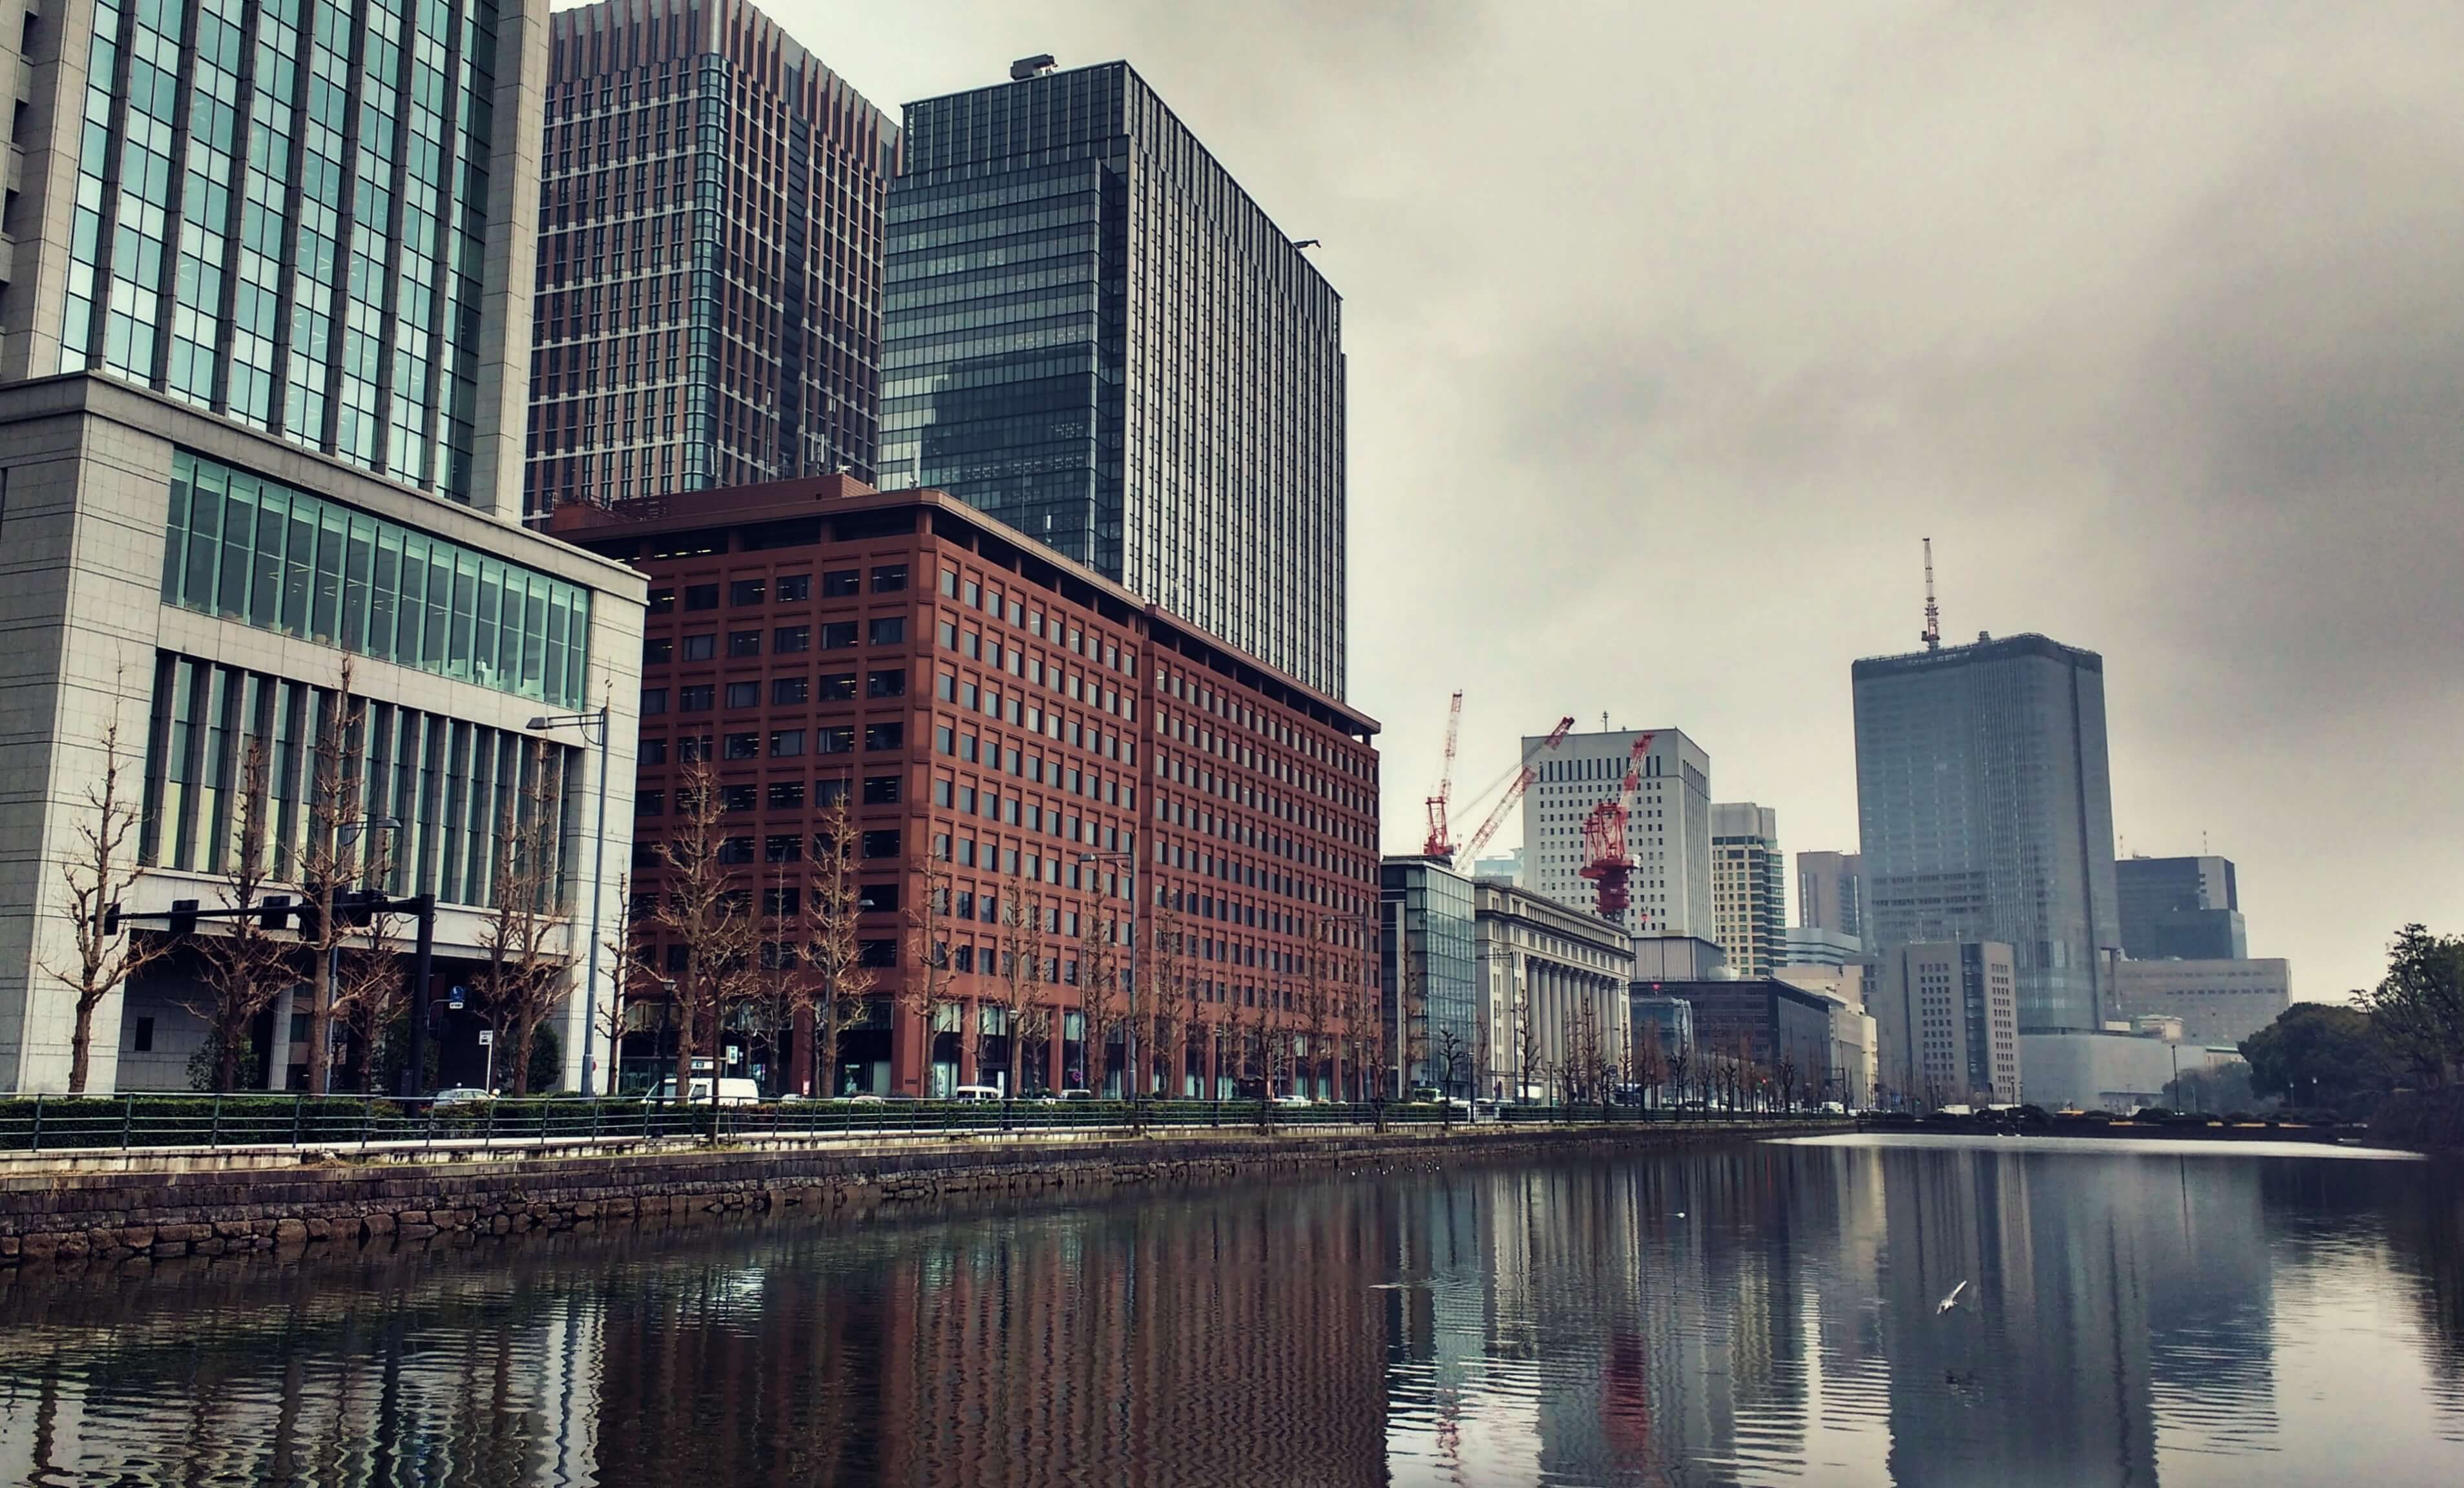 Tall grey buildings standing behind a river